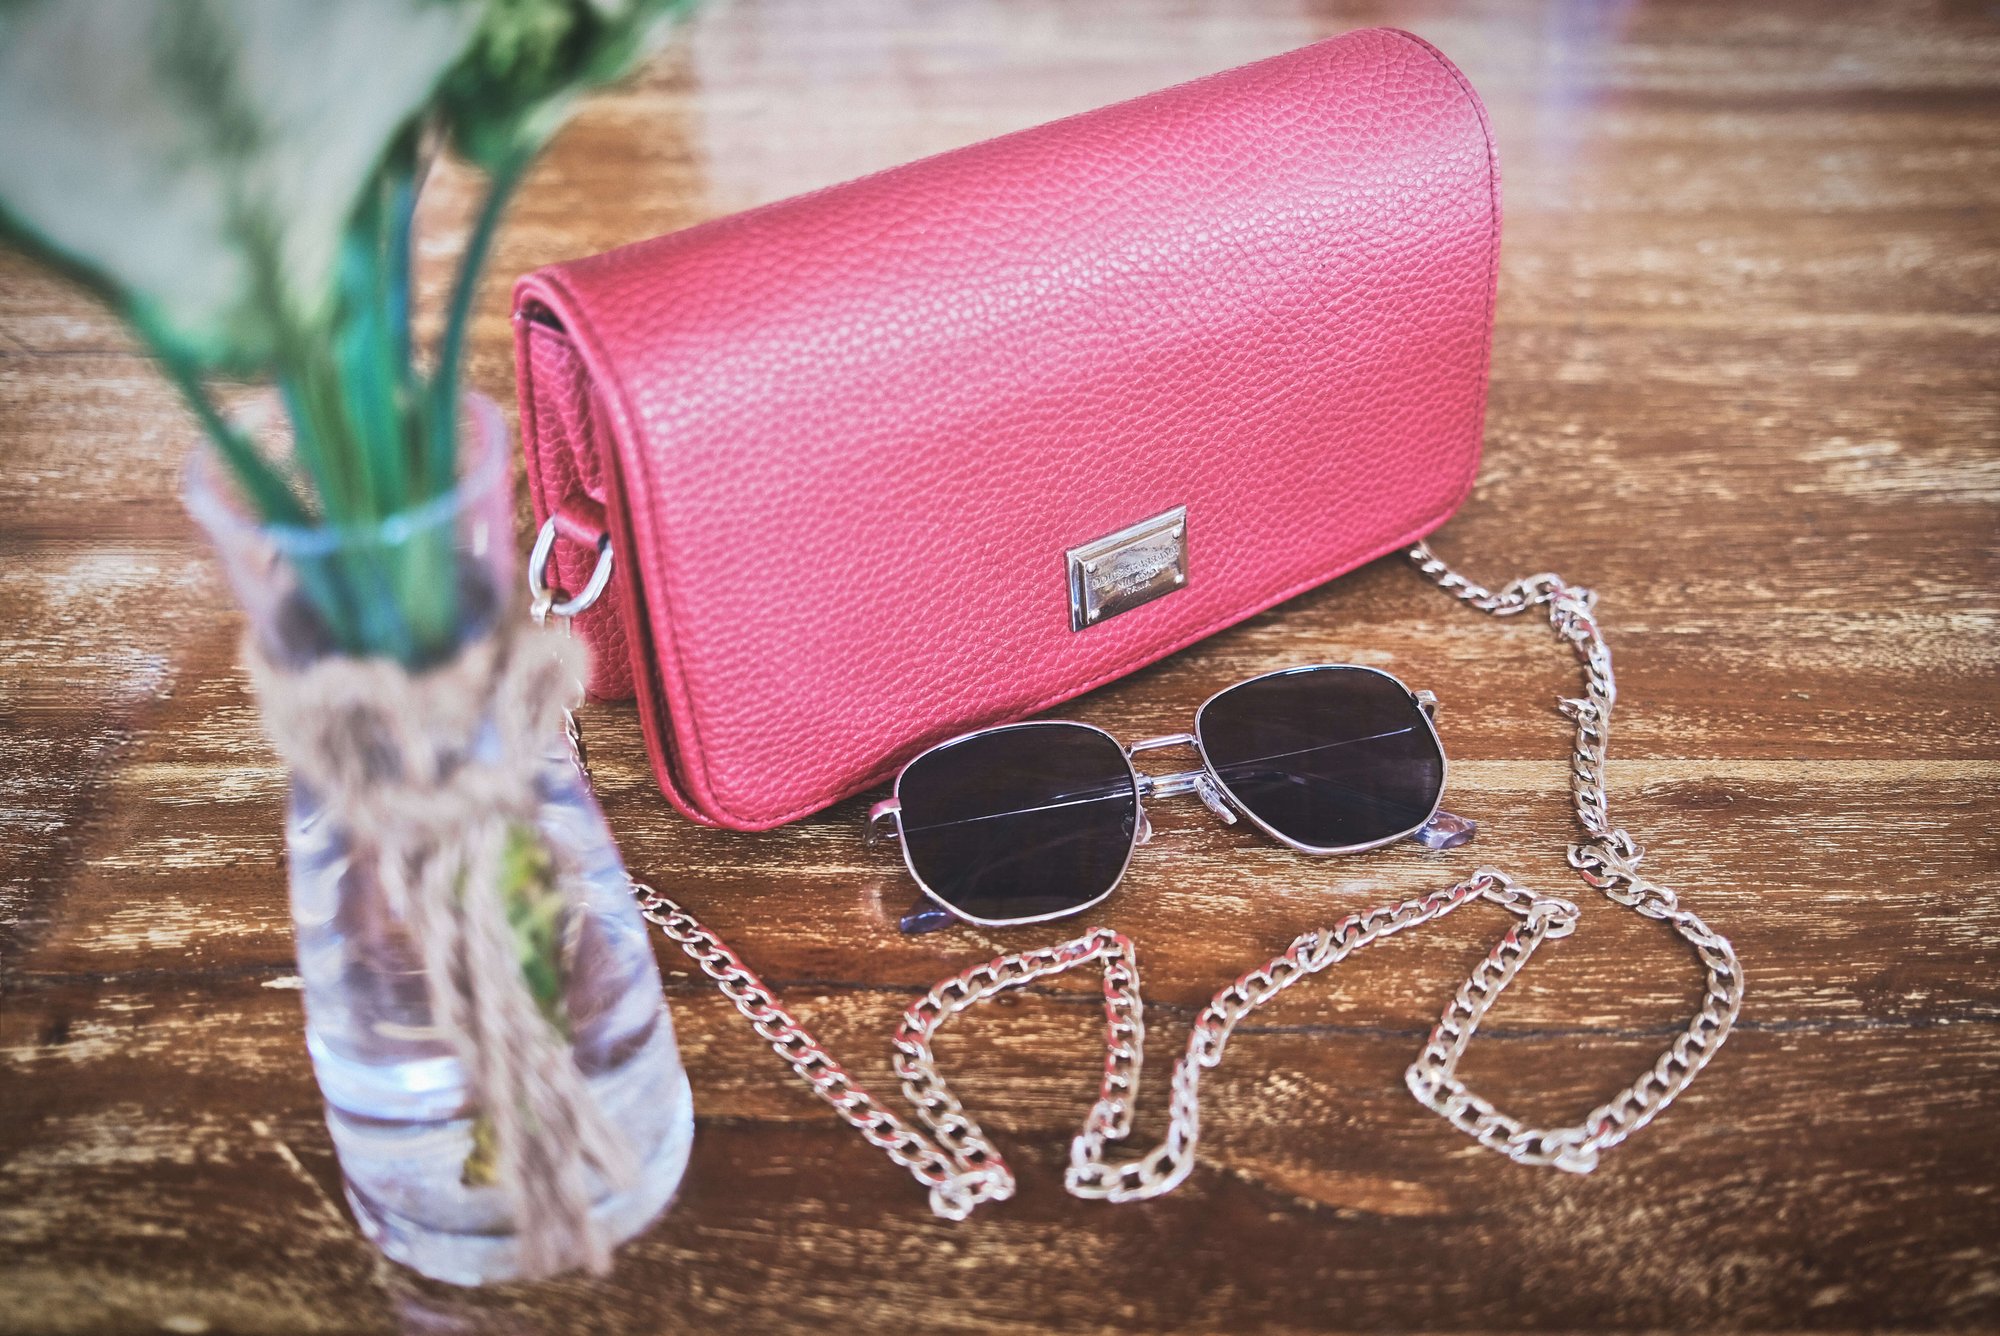 Pink handbag with golden chain and sun glasses